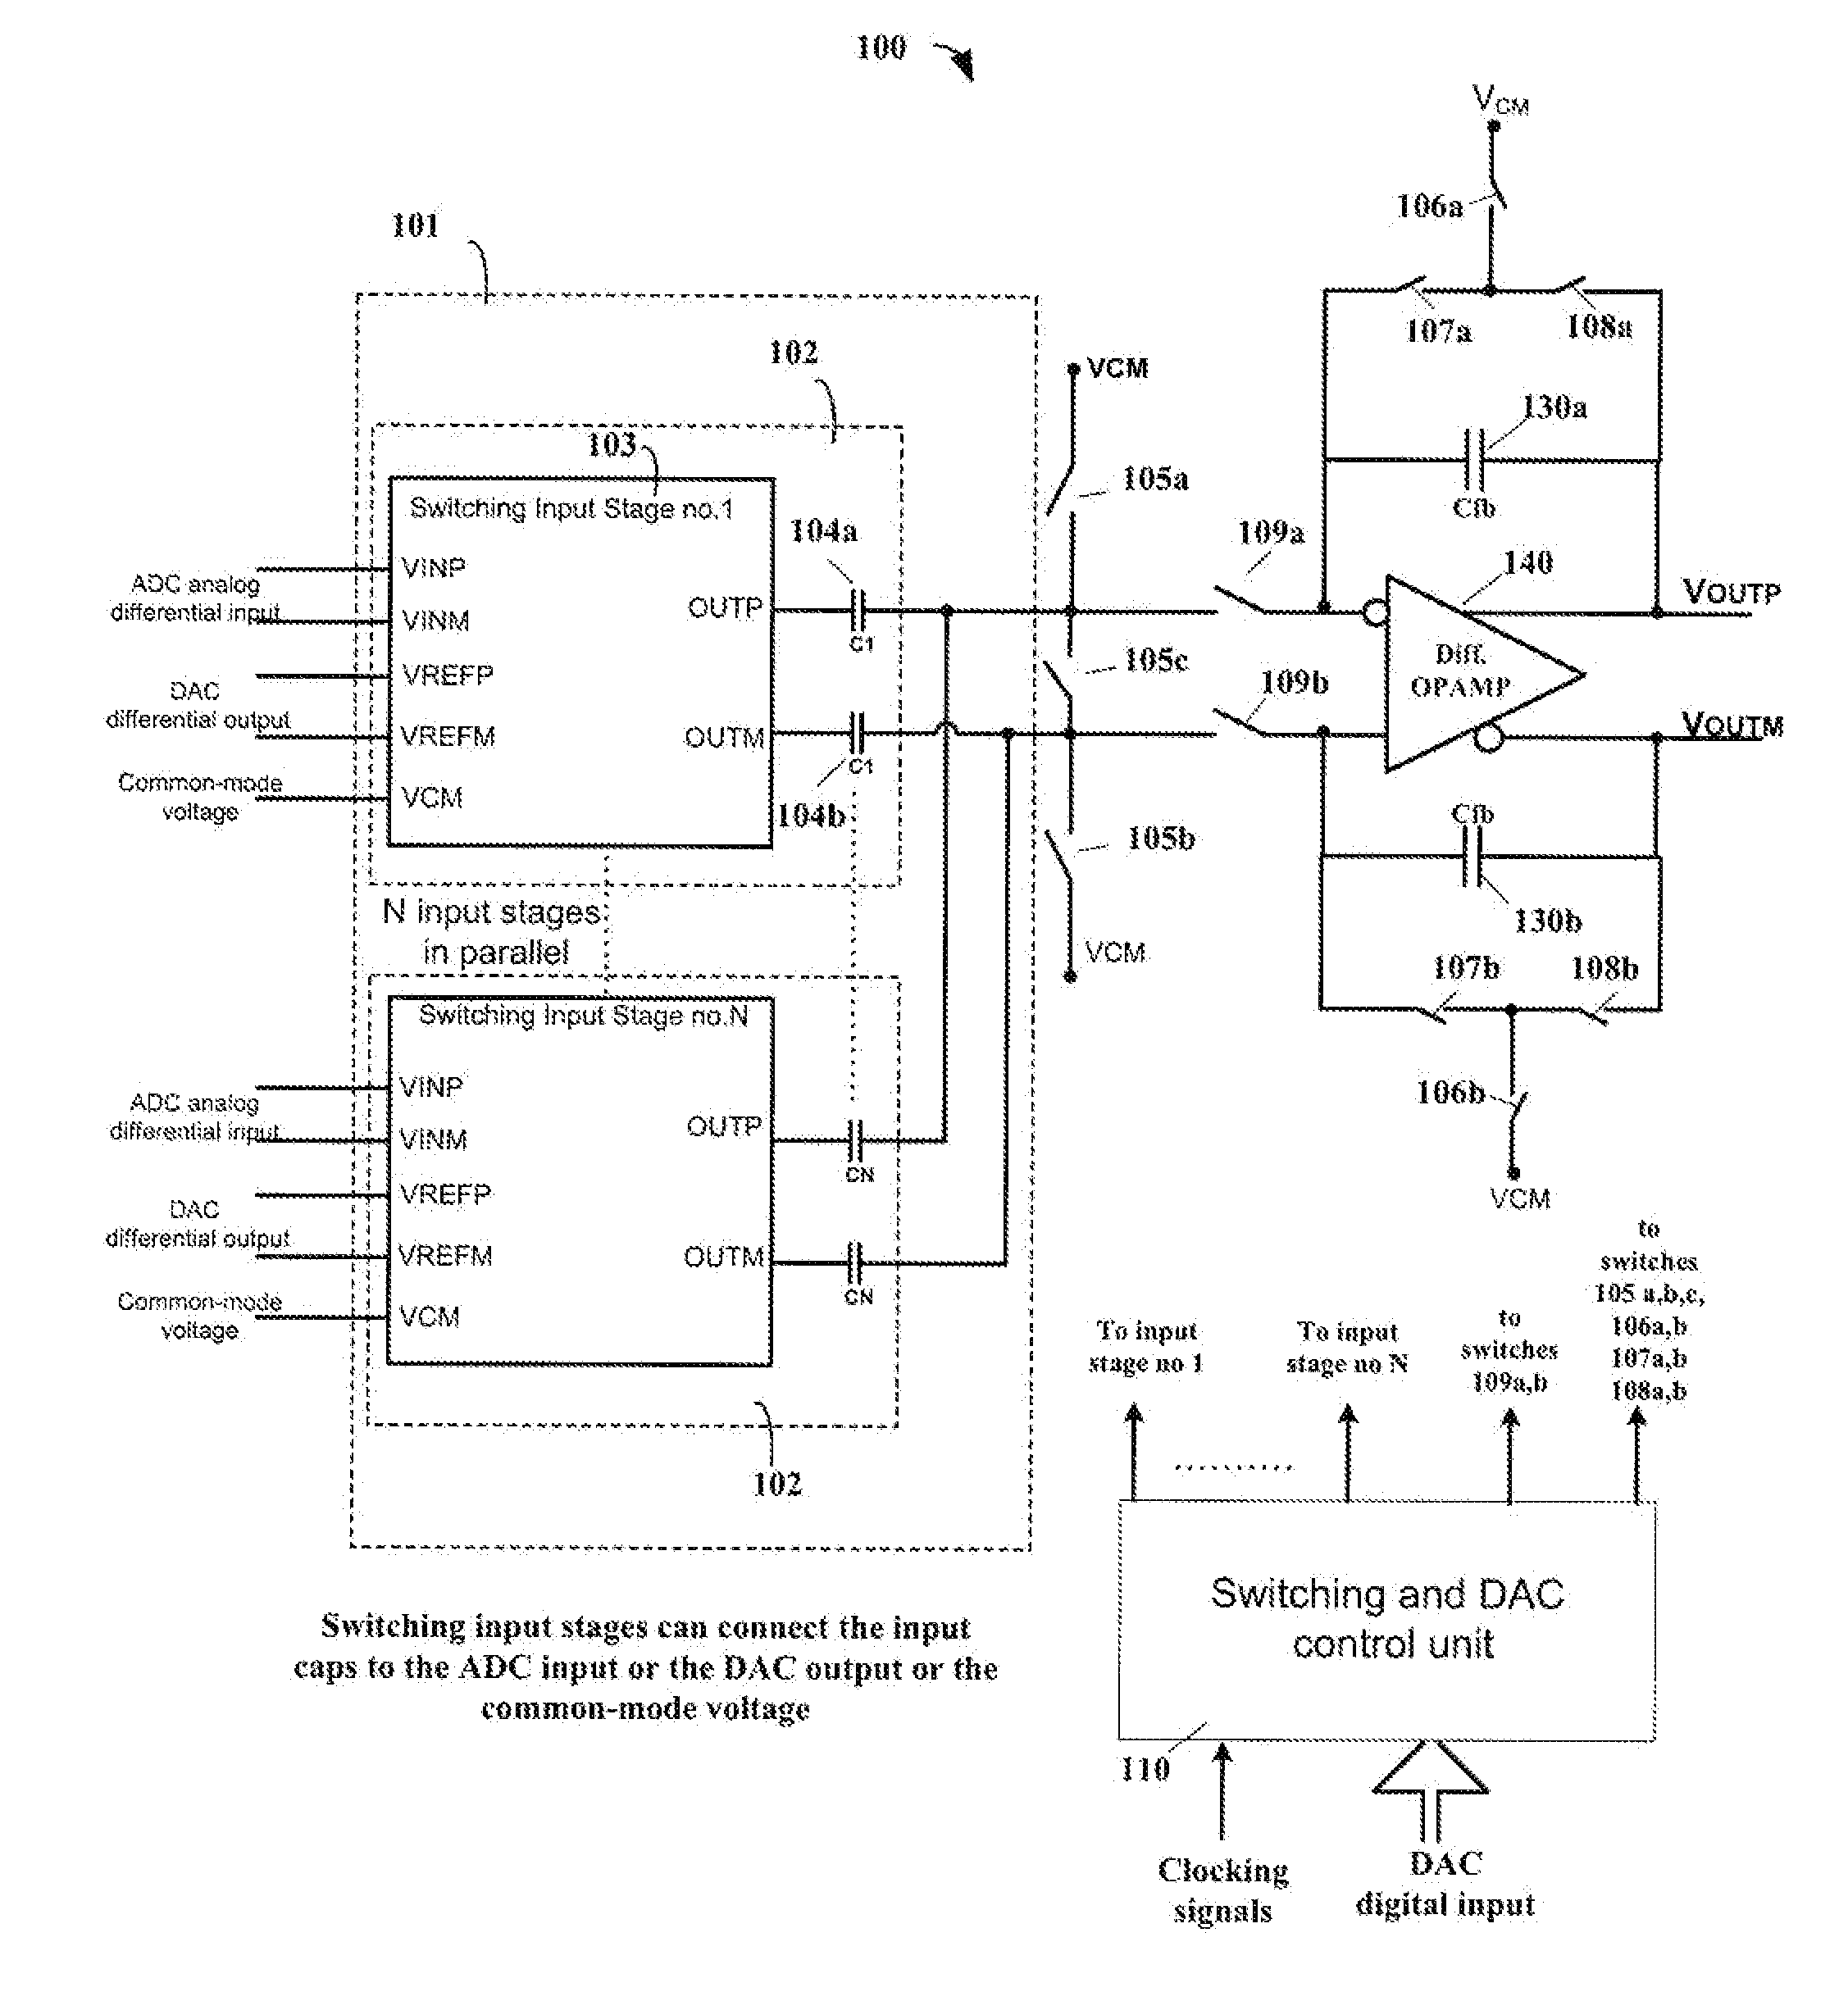 2-phase gain calibration and scaling scheme for switched capacitor sigma-delta modulator using a chopper voltage reference